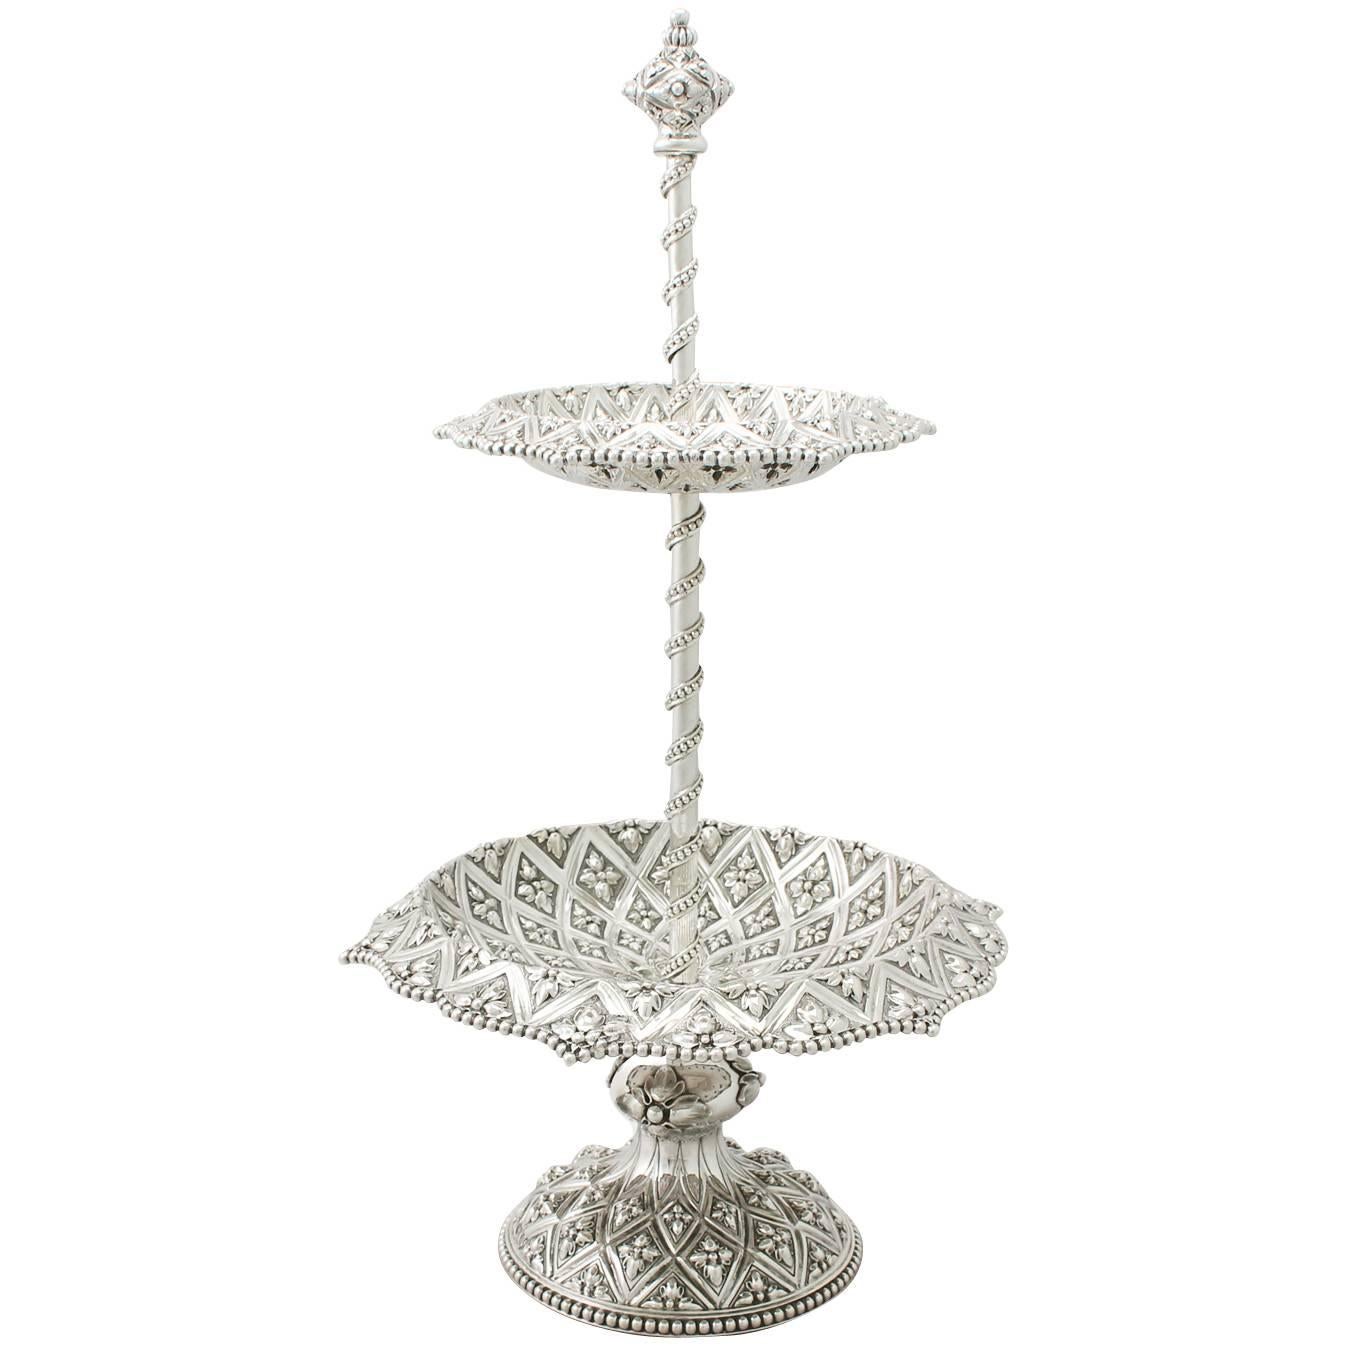 Sterling Silver Cake Stand or Centerpiece by Robert Hennell III, Victorian